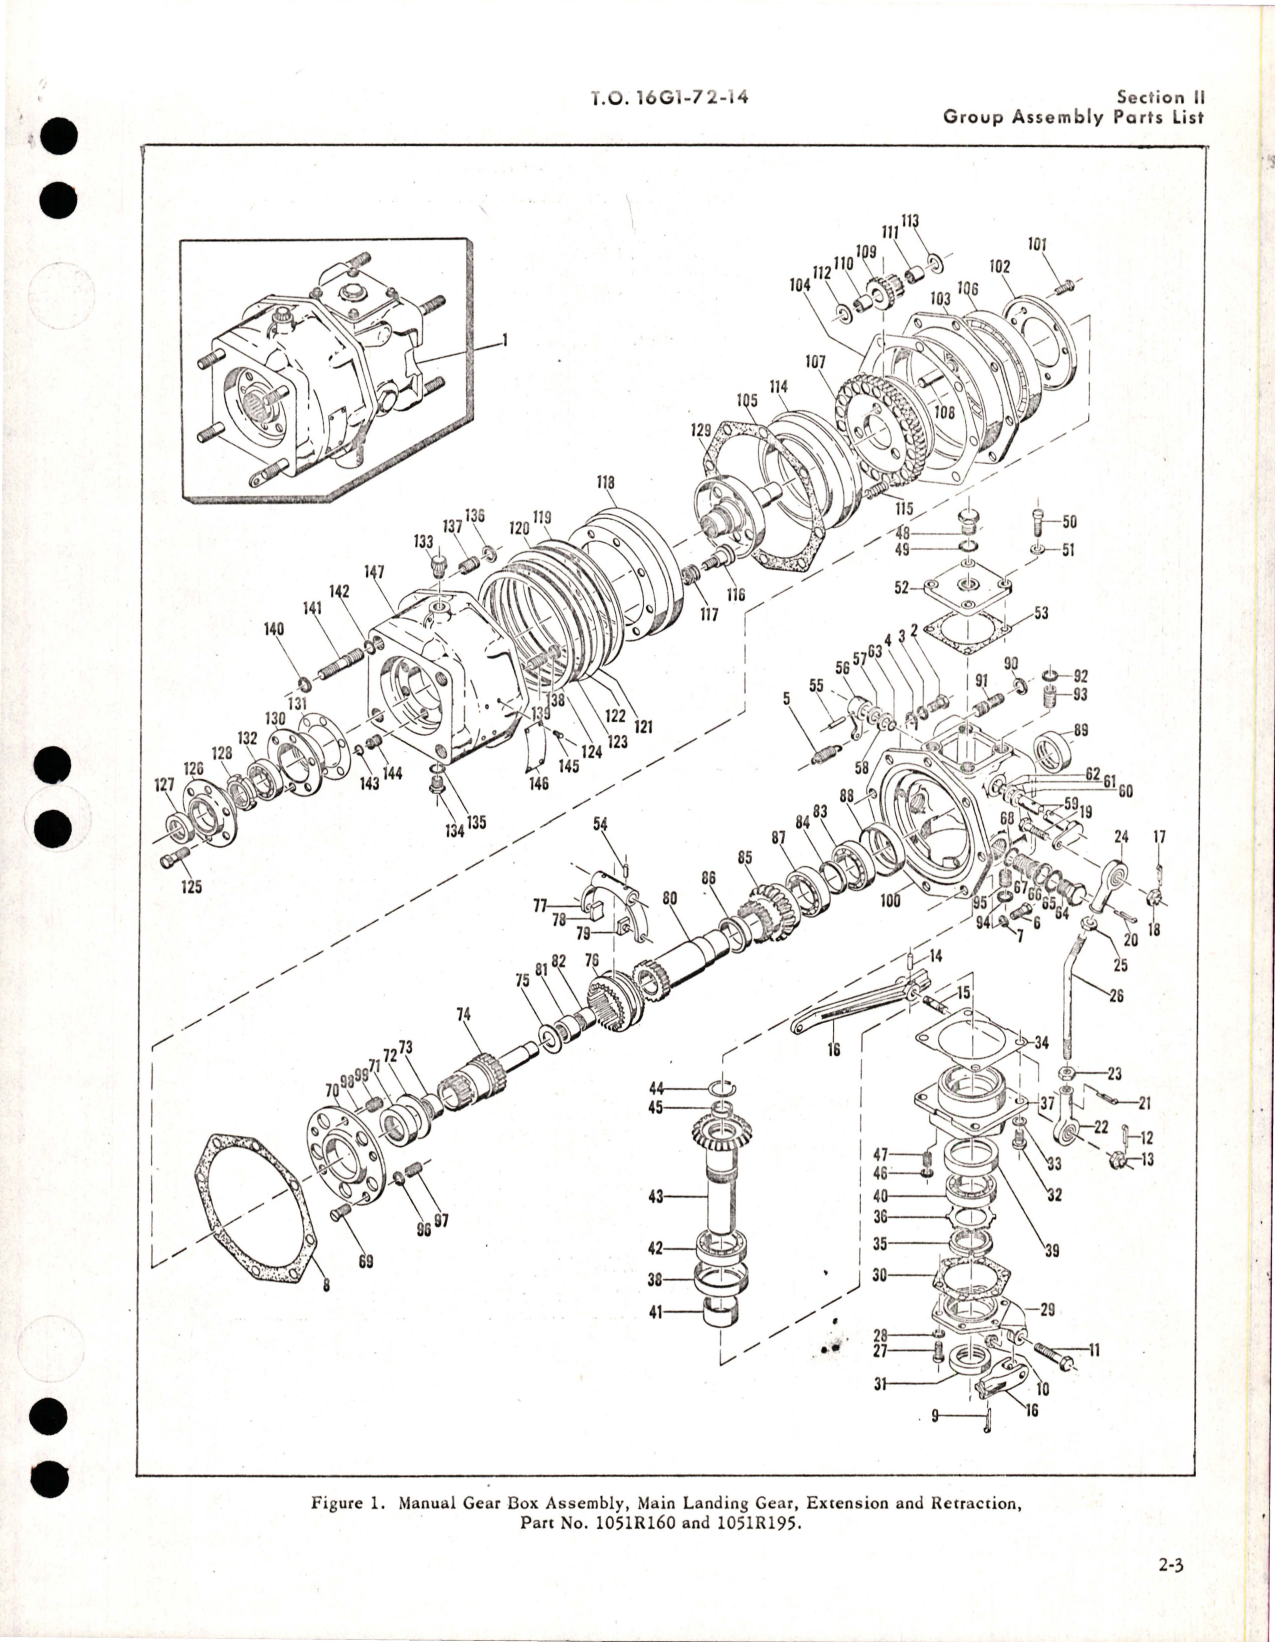 Sample page 5 from AirCorps Library document: Illustrated Parts Breakdown for Manual Gear Box Assembly, Main Landing Gear, Extension and Retraction Mechanism